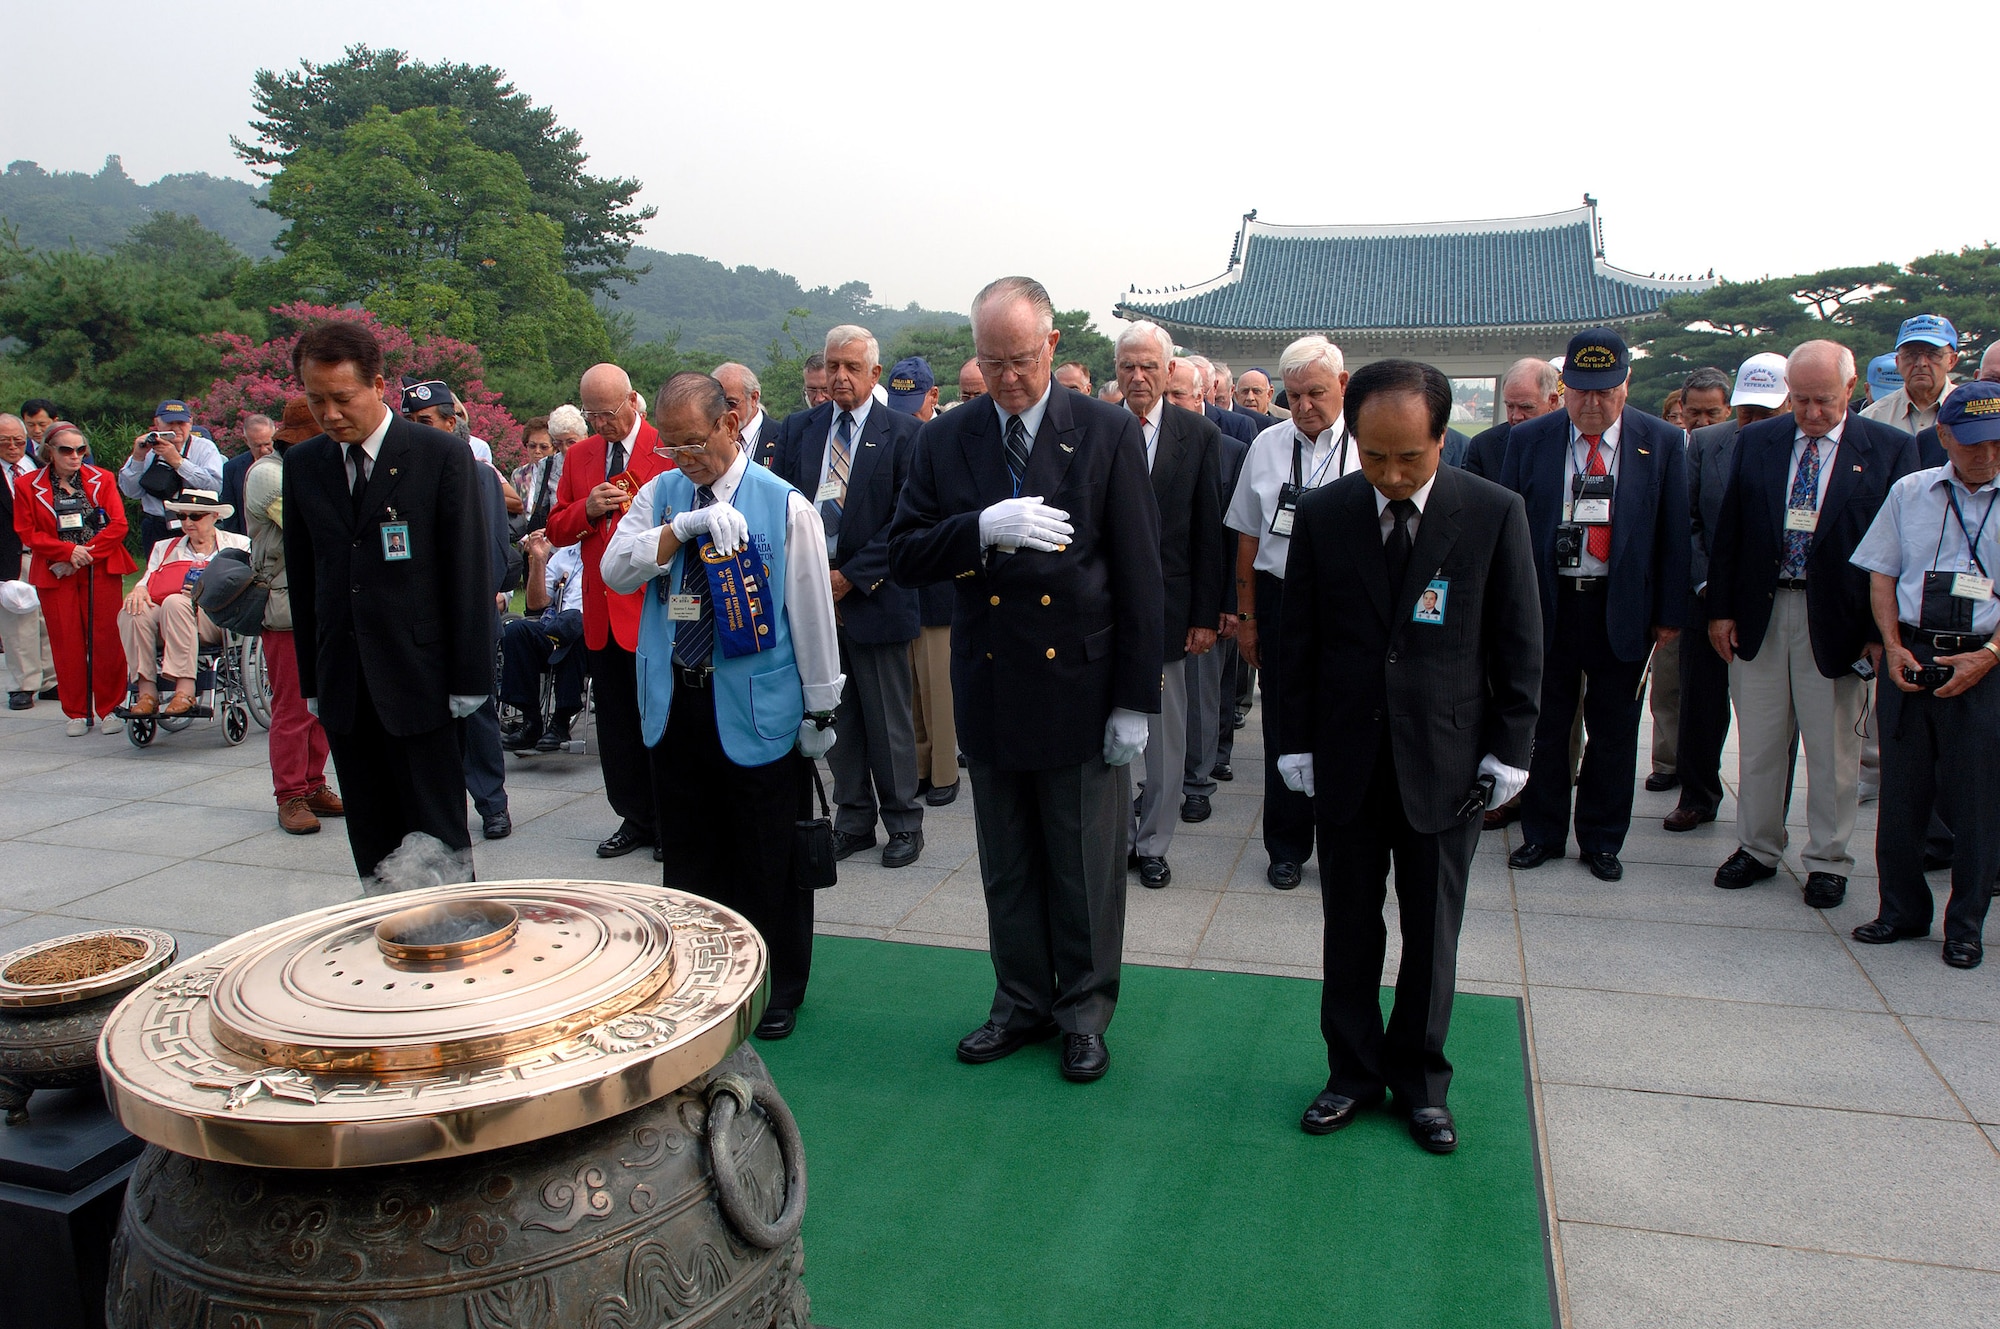 More than 200 Korean War veterans and family members pay respect to the men and women lost during the war with a moment of silence during a ceremony at the South Korean National Cemetery Sept. 12. The South Korean government's Revisit Korea program invites war veterans each year to come to South Korea to honor the men and woman from 21 countries who served during the Korean War. Nearly 25,000 veterans have participated in this program since 1975. (U.S. Air Force photo/Staff Sgt. Bennie J. Davis III) 
